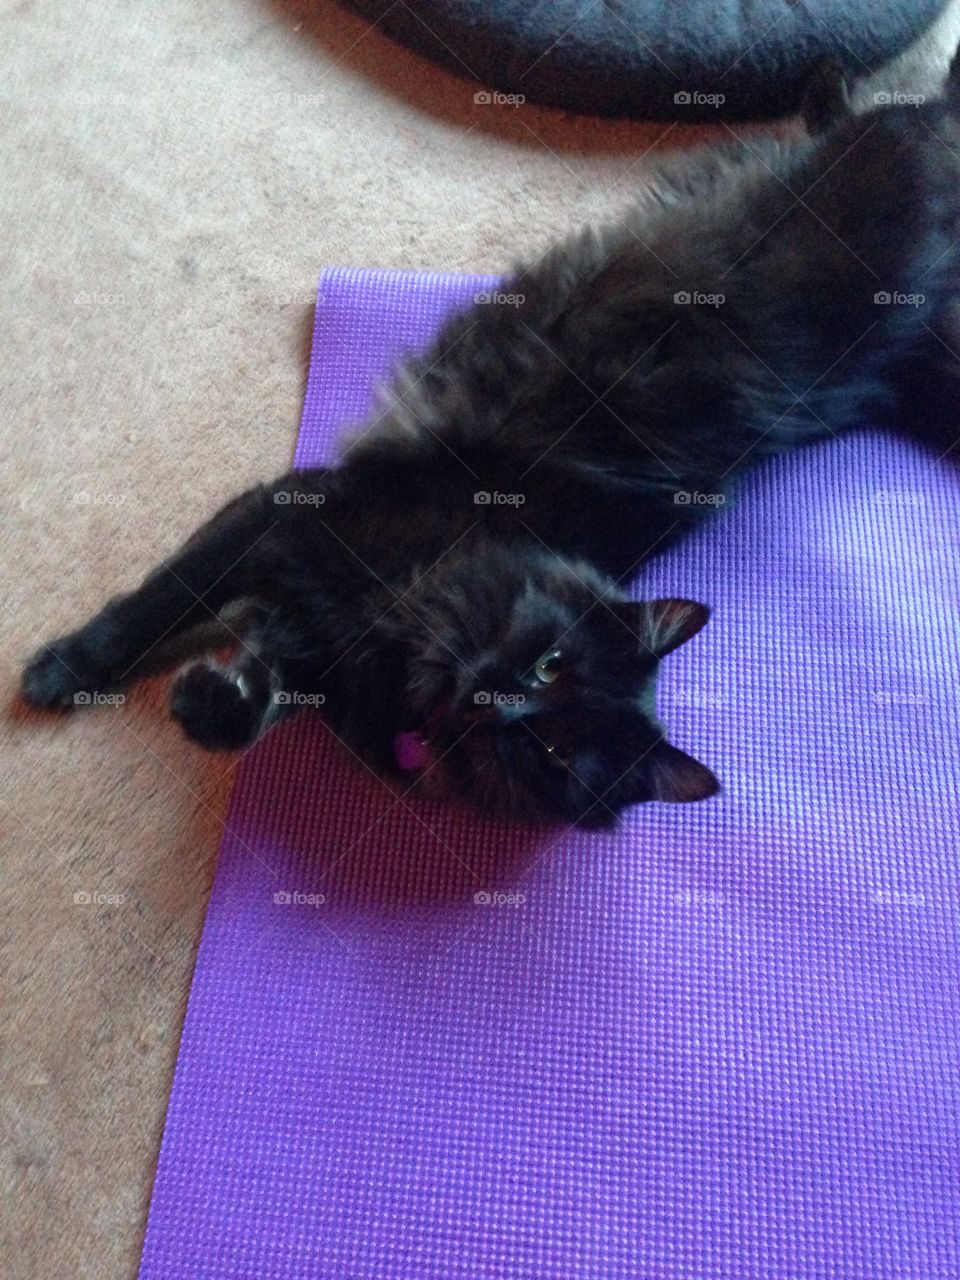 I'll help you do your yoga! 